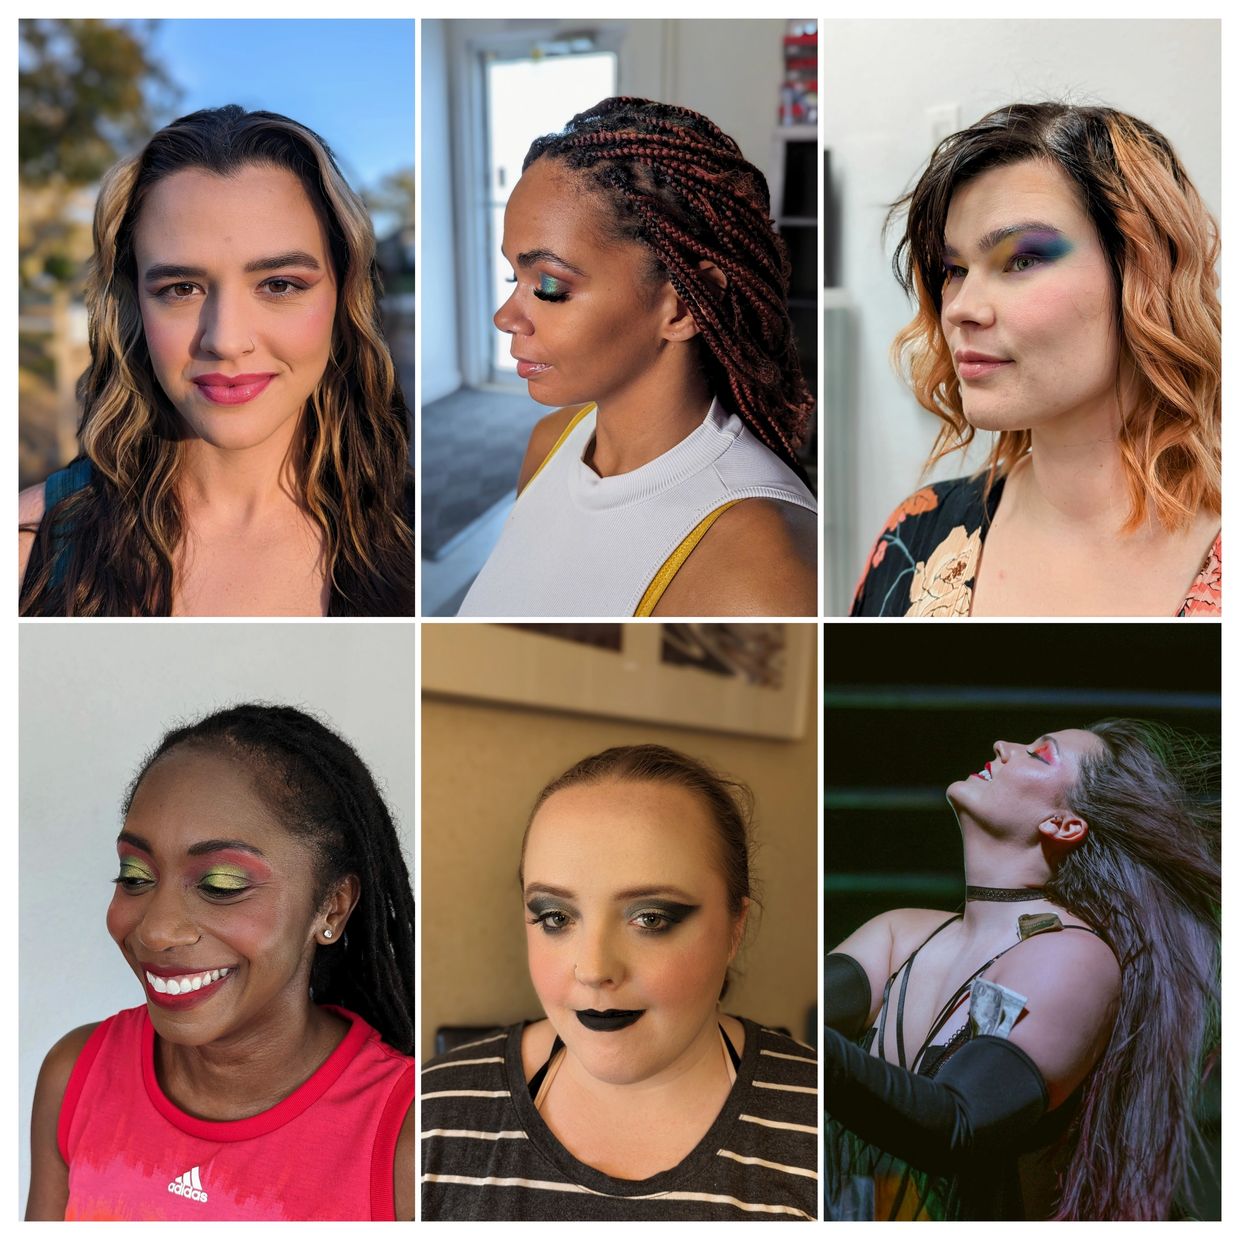 Models wearing colorful and vibrant makeup on various skin tones and eye shapes